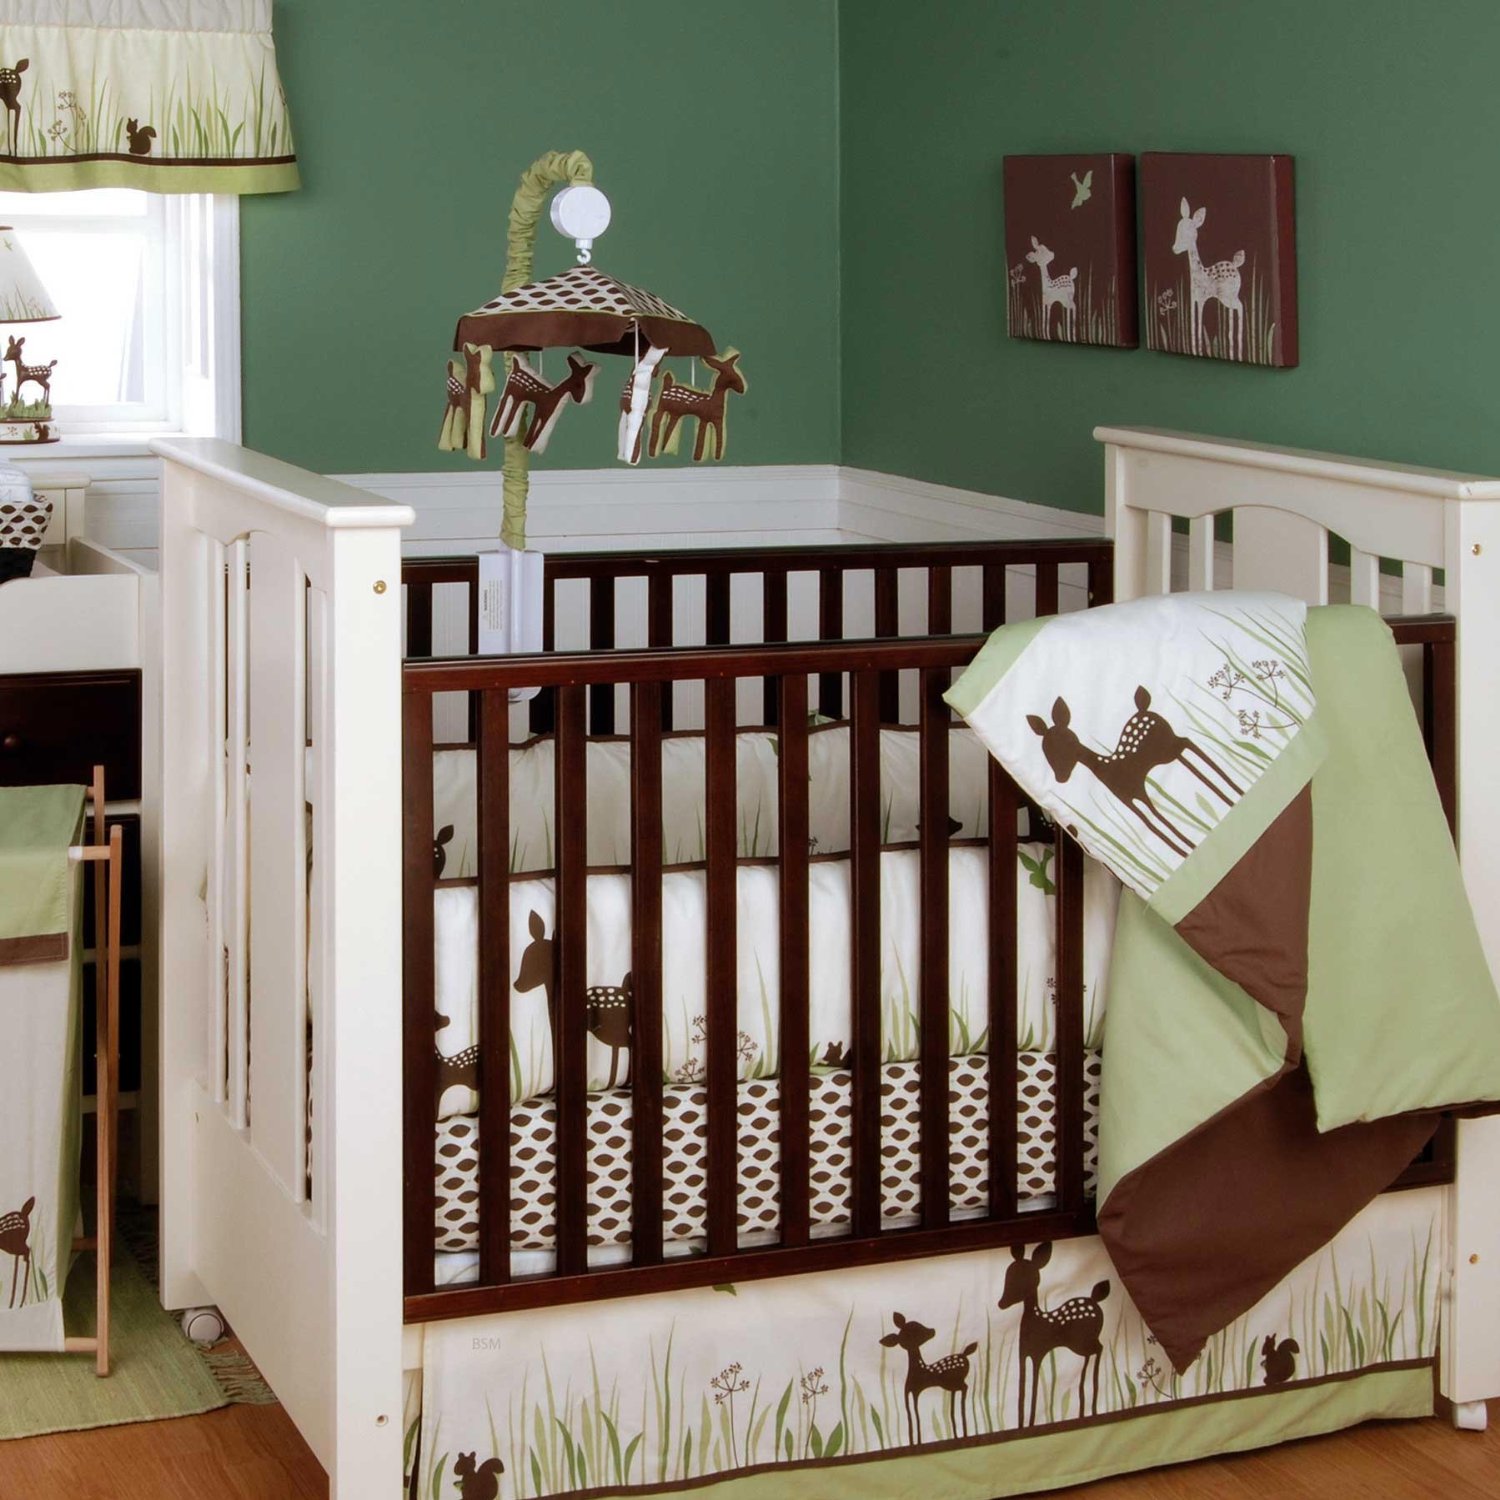 White Painted Crib Fresh White Painted Baby Boy Crib Bedding Integrating Brown Splash Covering The Railing With Animal Pattern Kids Room Enchanting Baby Boy Crib Bedding Applied In Colorful Baby Room